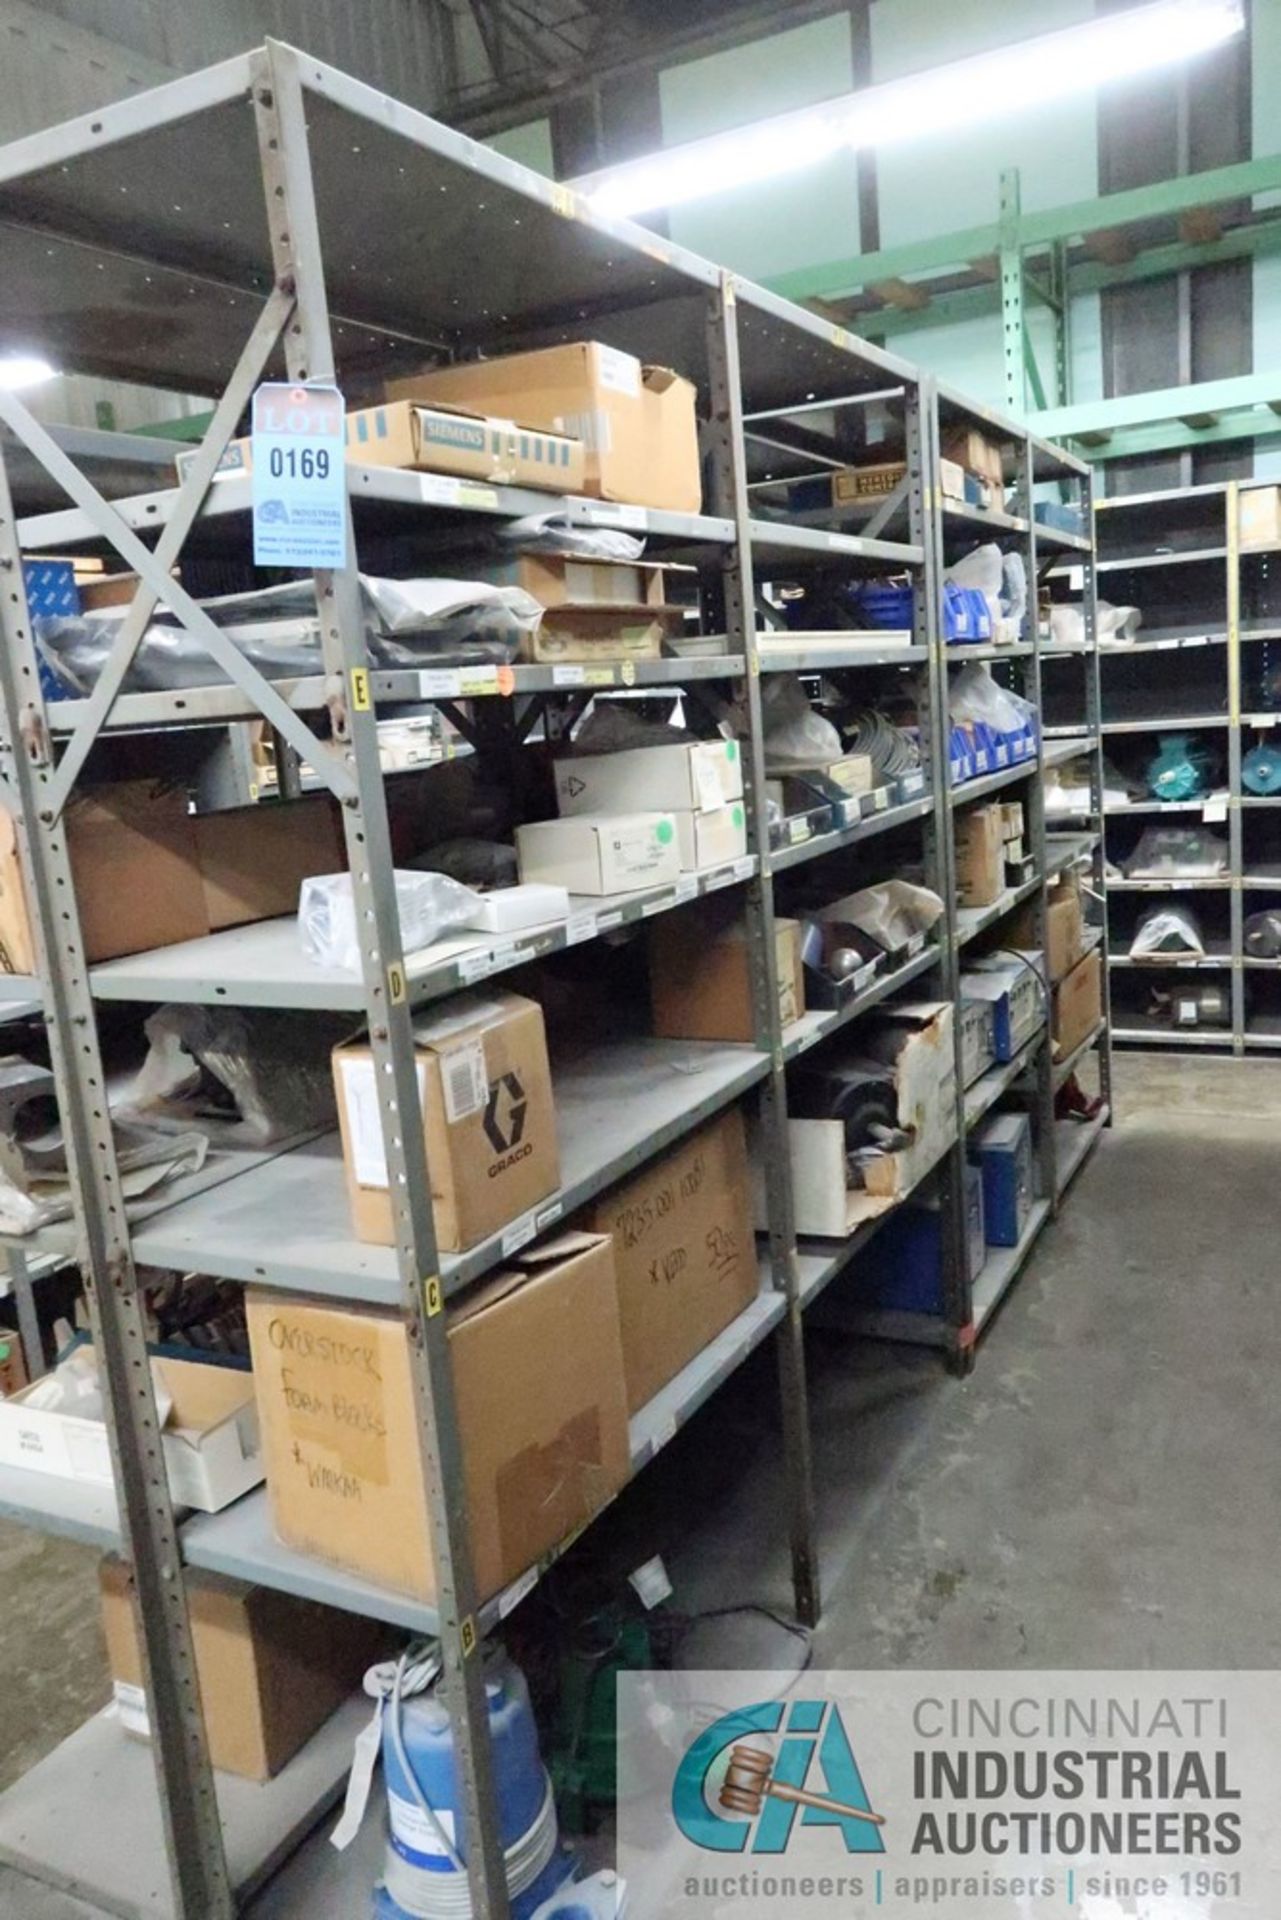 (LOT) (8) SECTIONS STEEL SHELVING W/ MISC. MODULES, CONTROLLERS, VELDING SYSTEMS, PUMPS, LIGHT